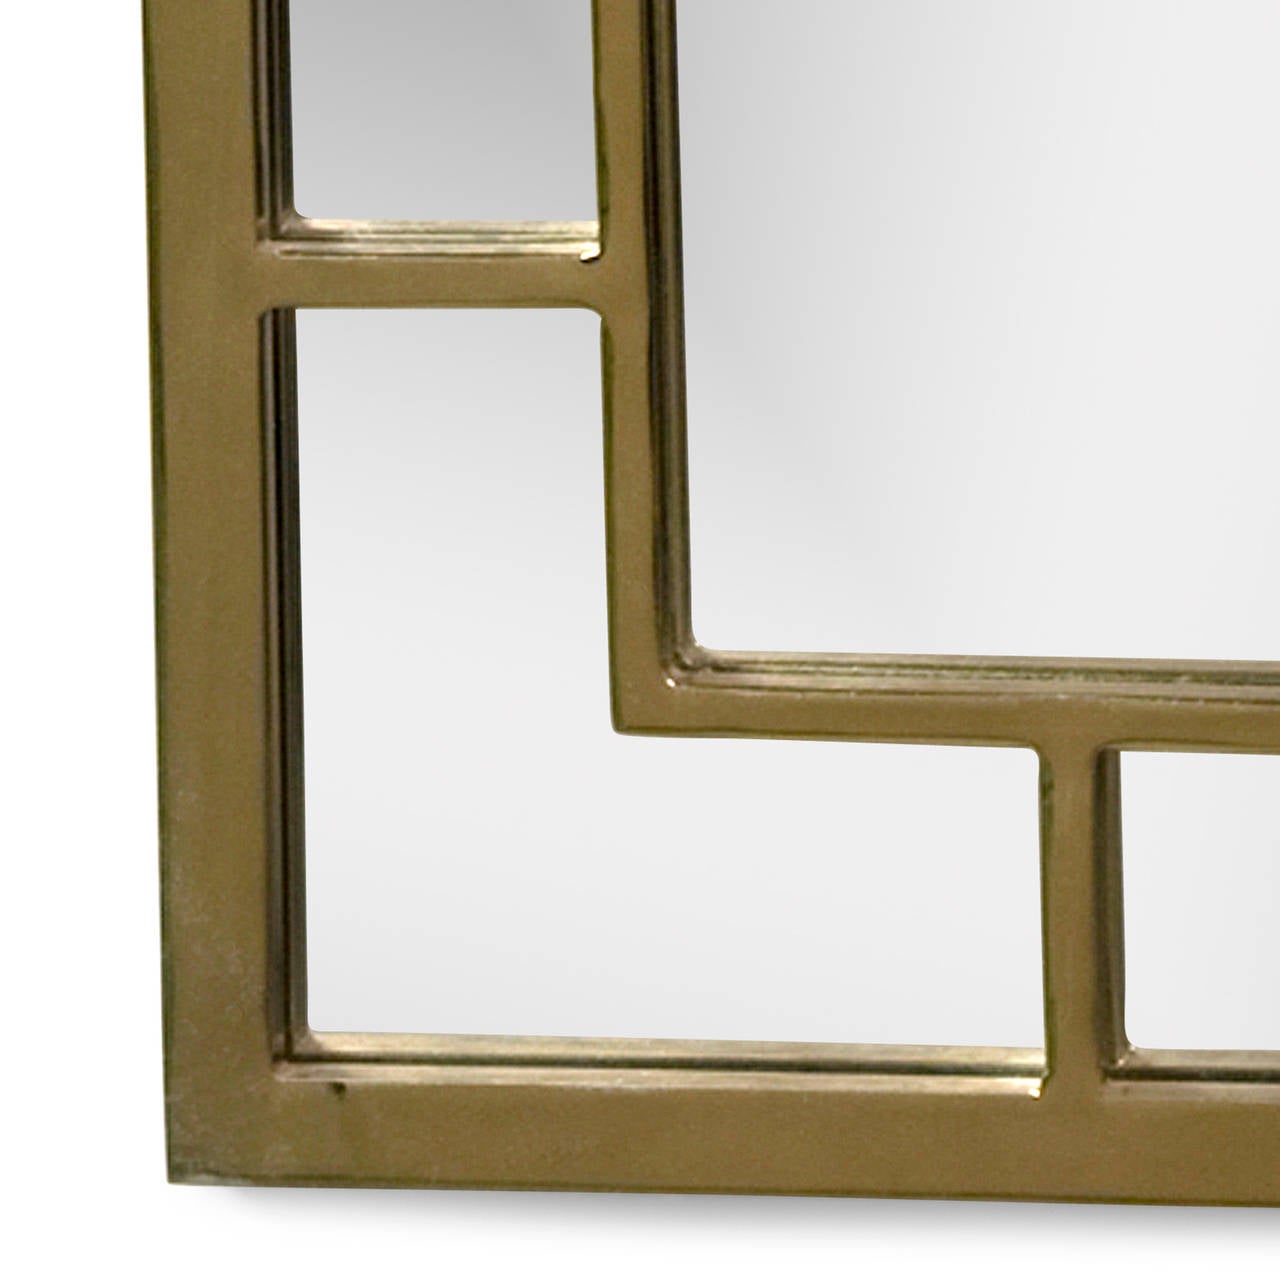 Double border brass frame mirror, with rectangular mirror panels on outer edge framing the center mirror, all with brass borders, American 1970s. 41 in x 25 in. (Item #1676)